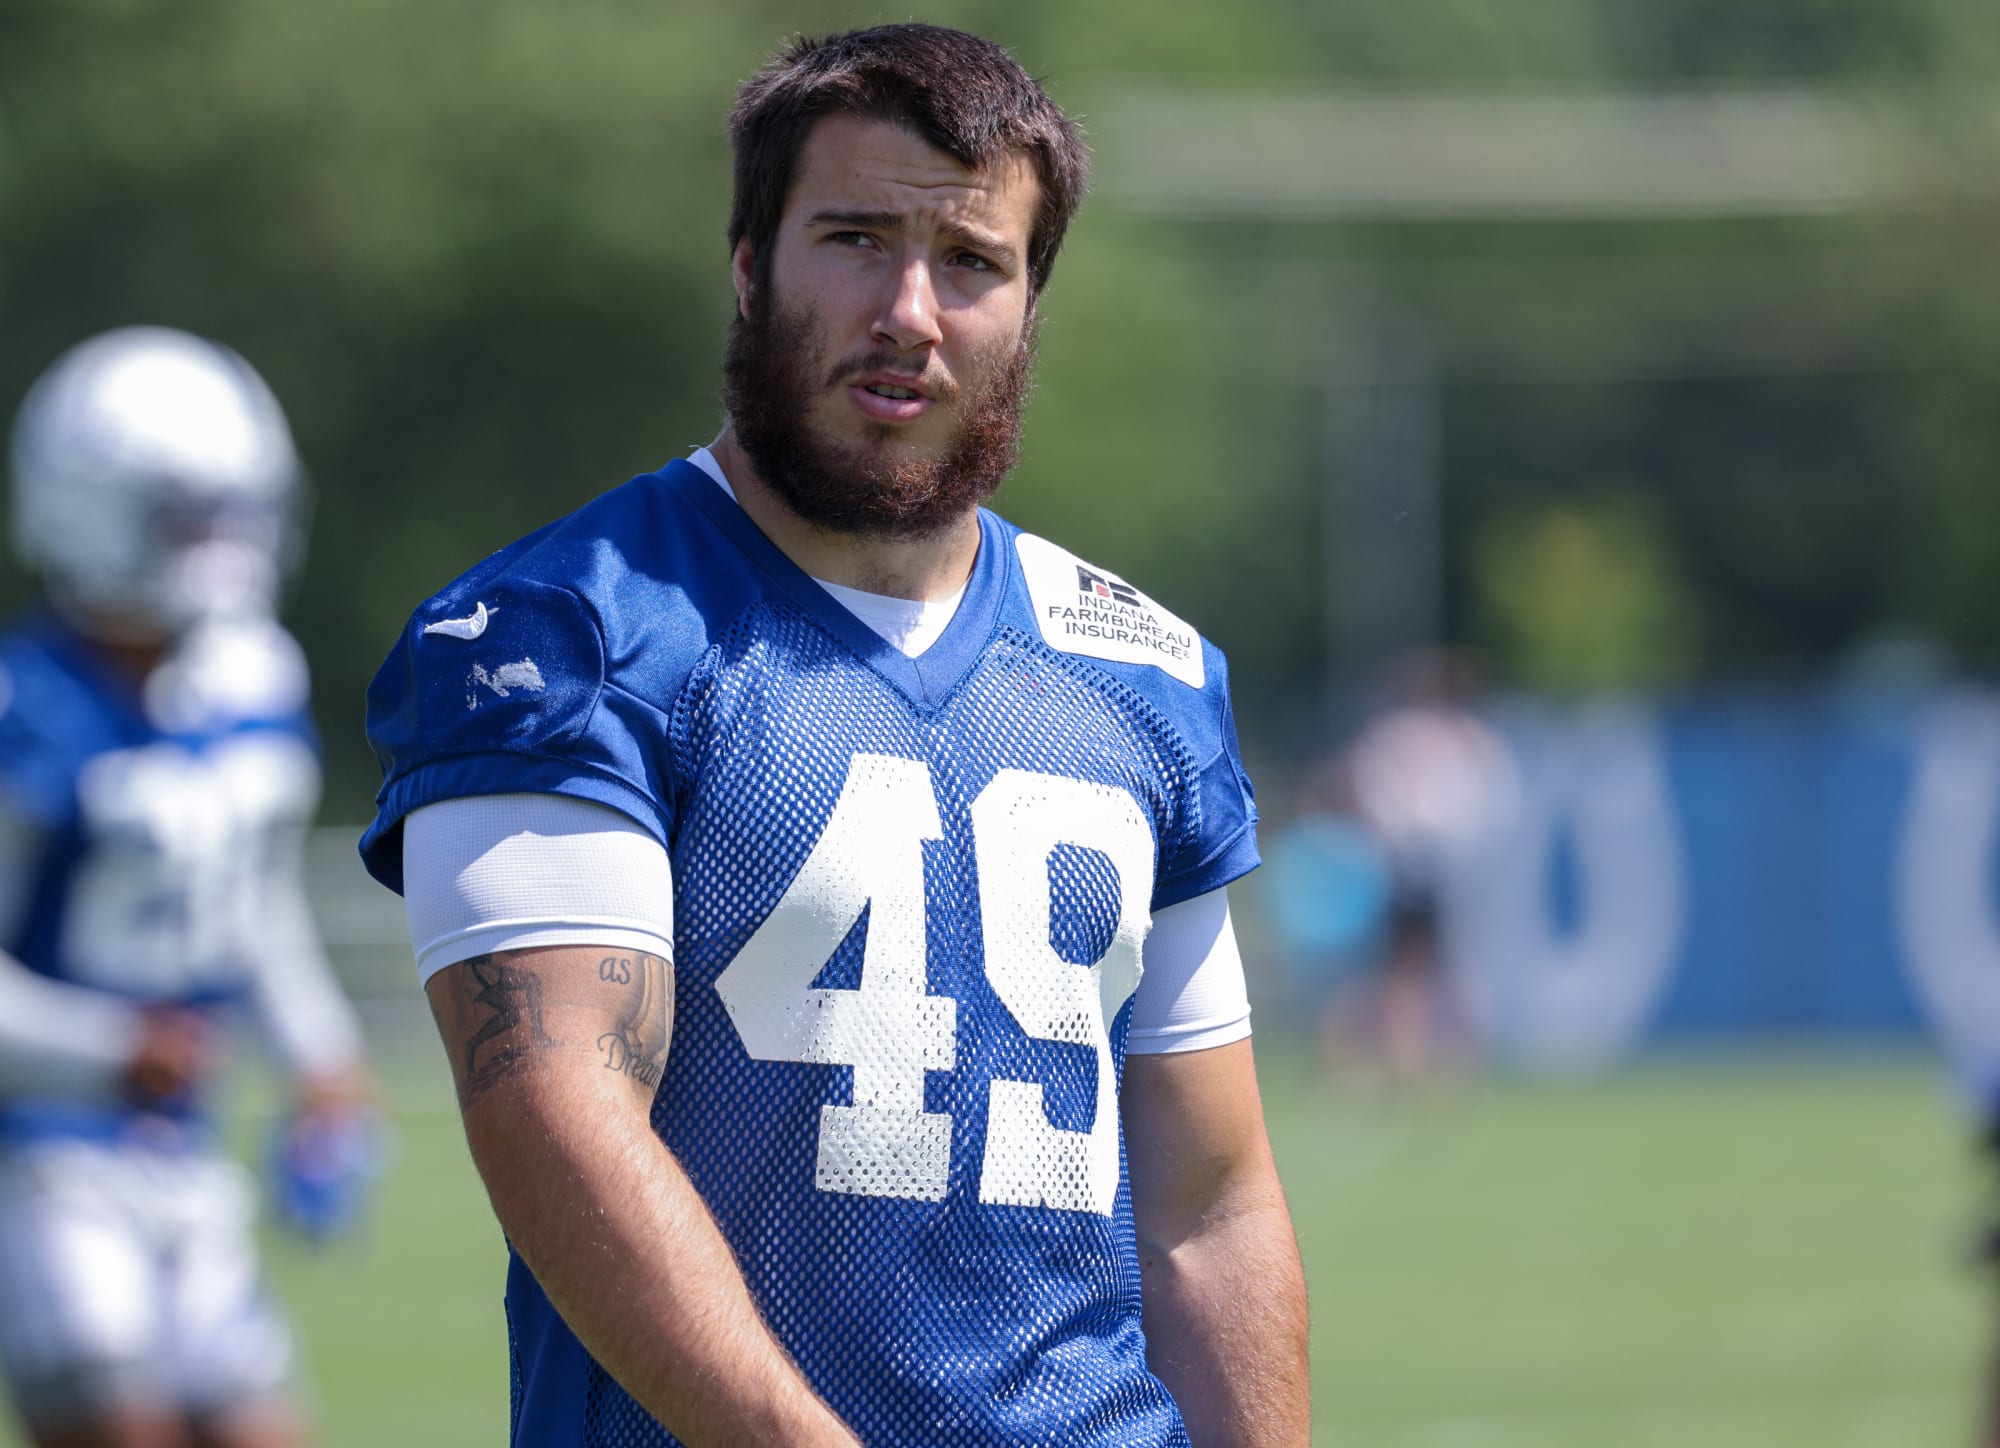 Which undrafted rookies have been the most impressive for the Colts?